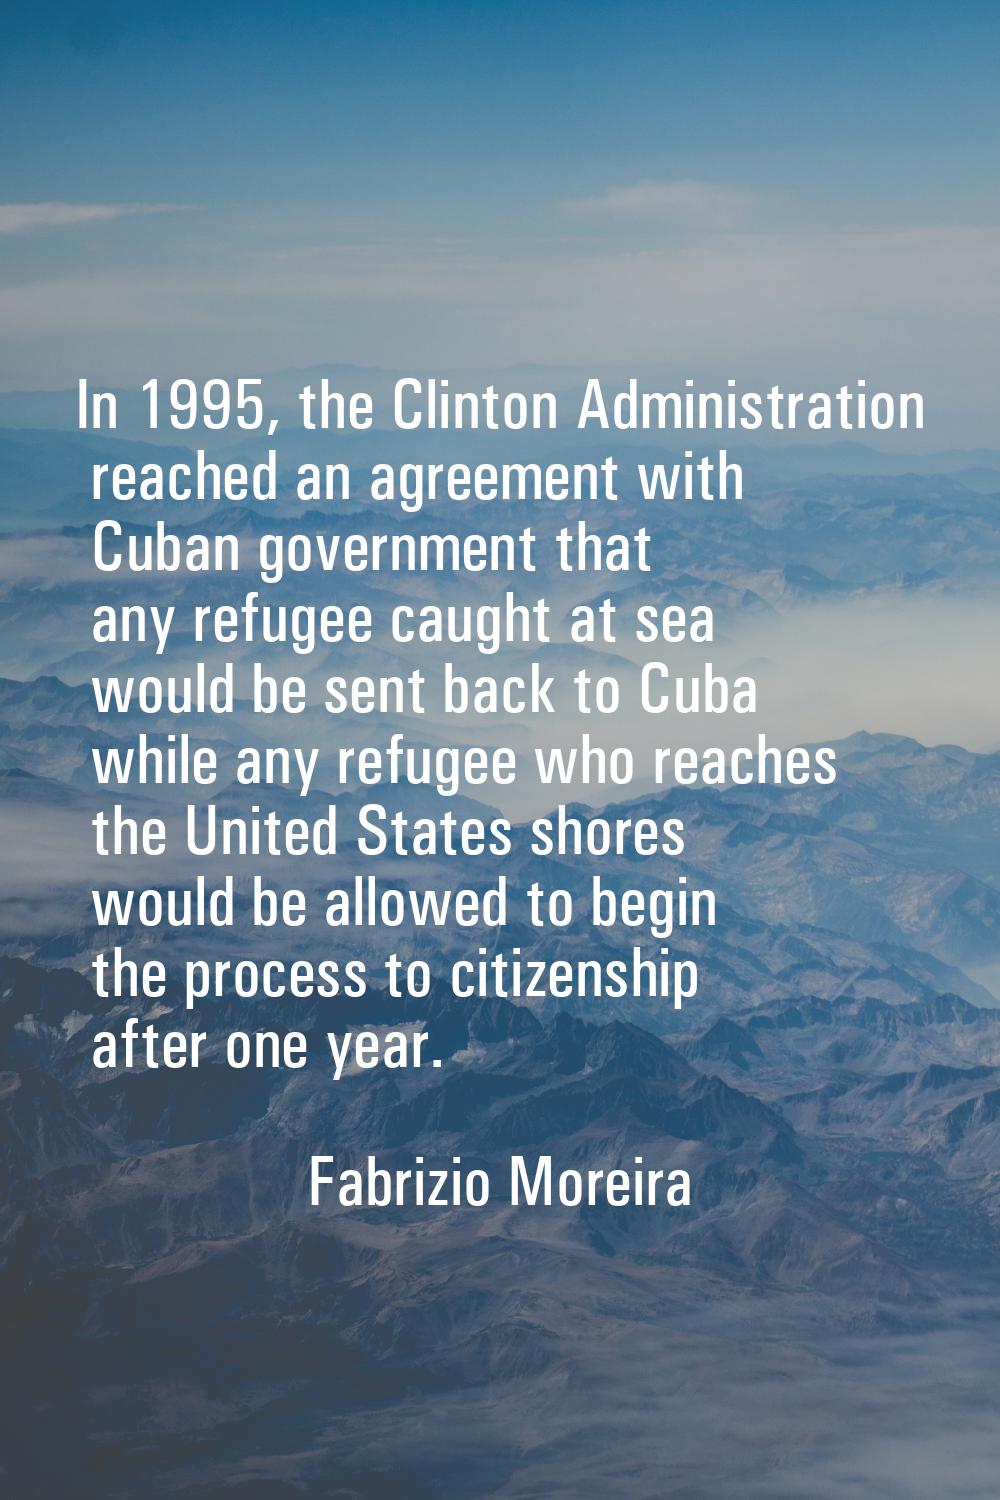 In 1995, the Clinton Administration reached an agreement with Cuban government that any refugee cau